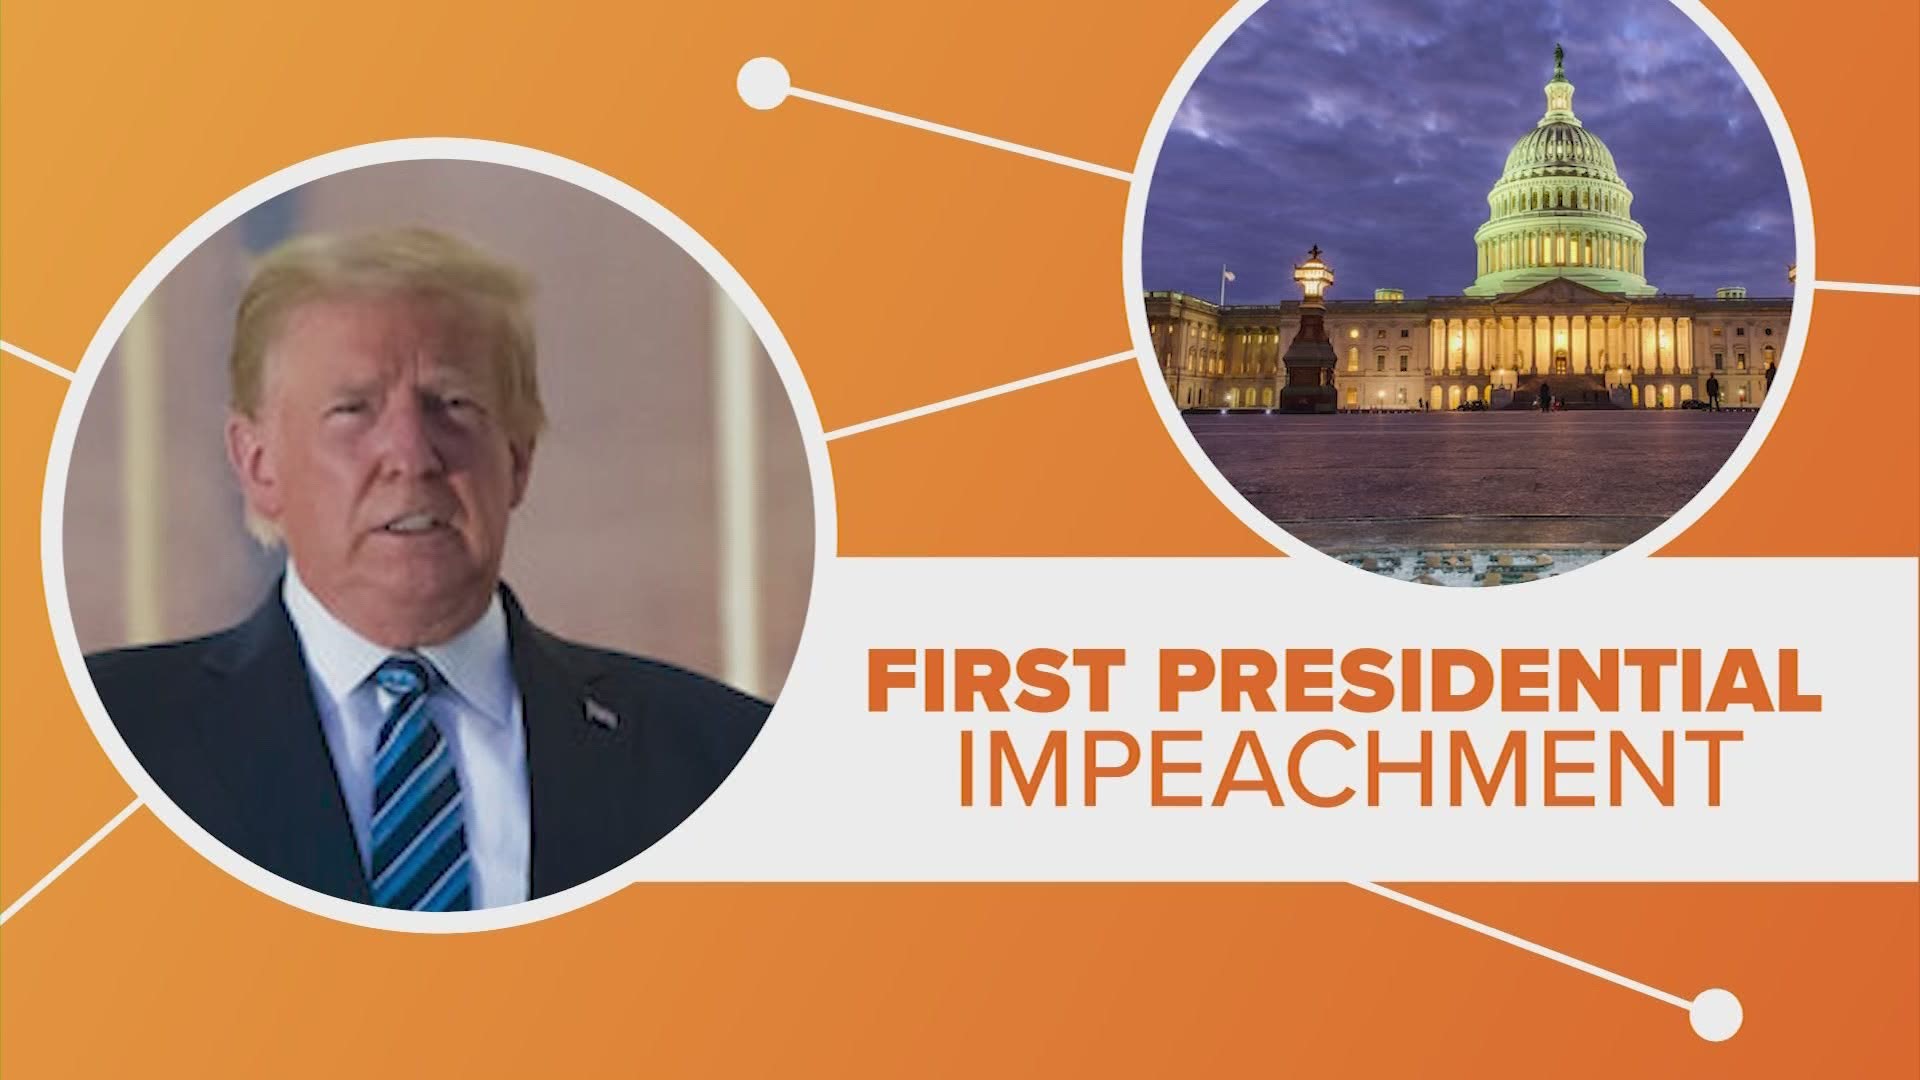 The first presidential impeachment happened during one of the darkest times in American history. Let’s connect the dots.